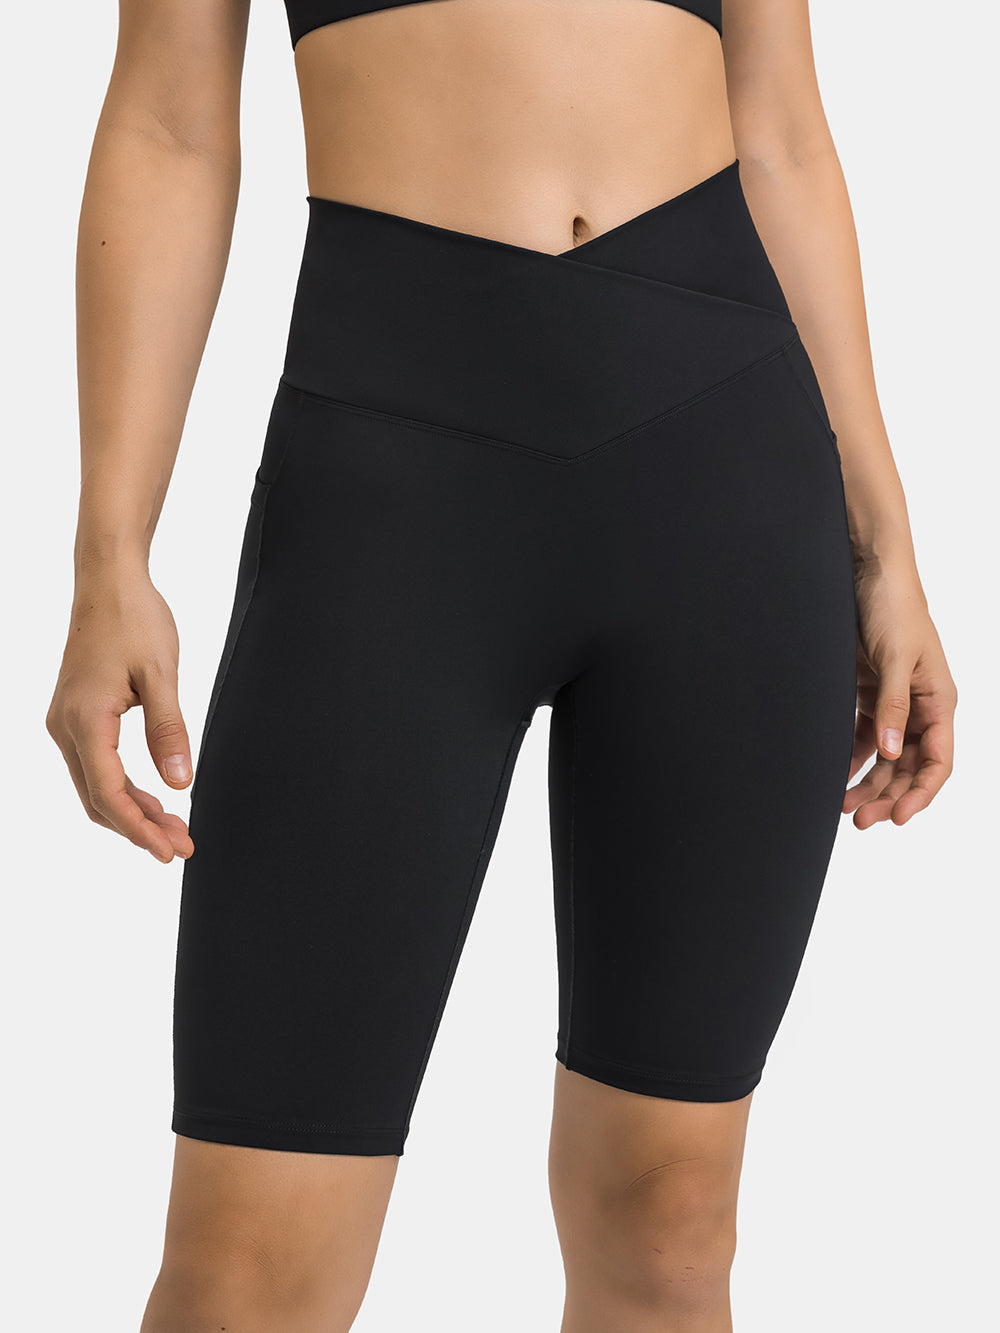 Women's Black Bicycle Sports Shorts - RectoVerso Sports